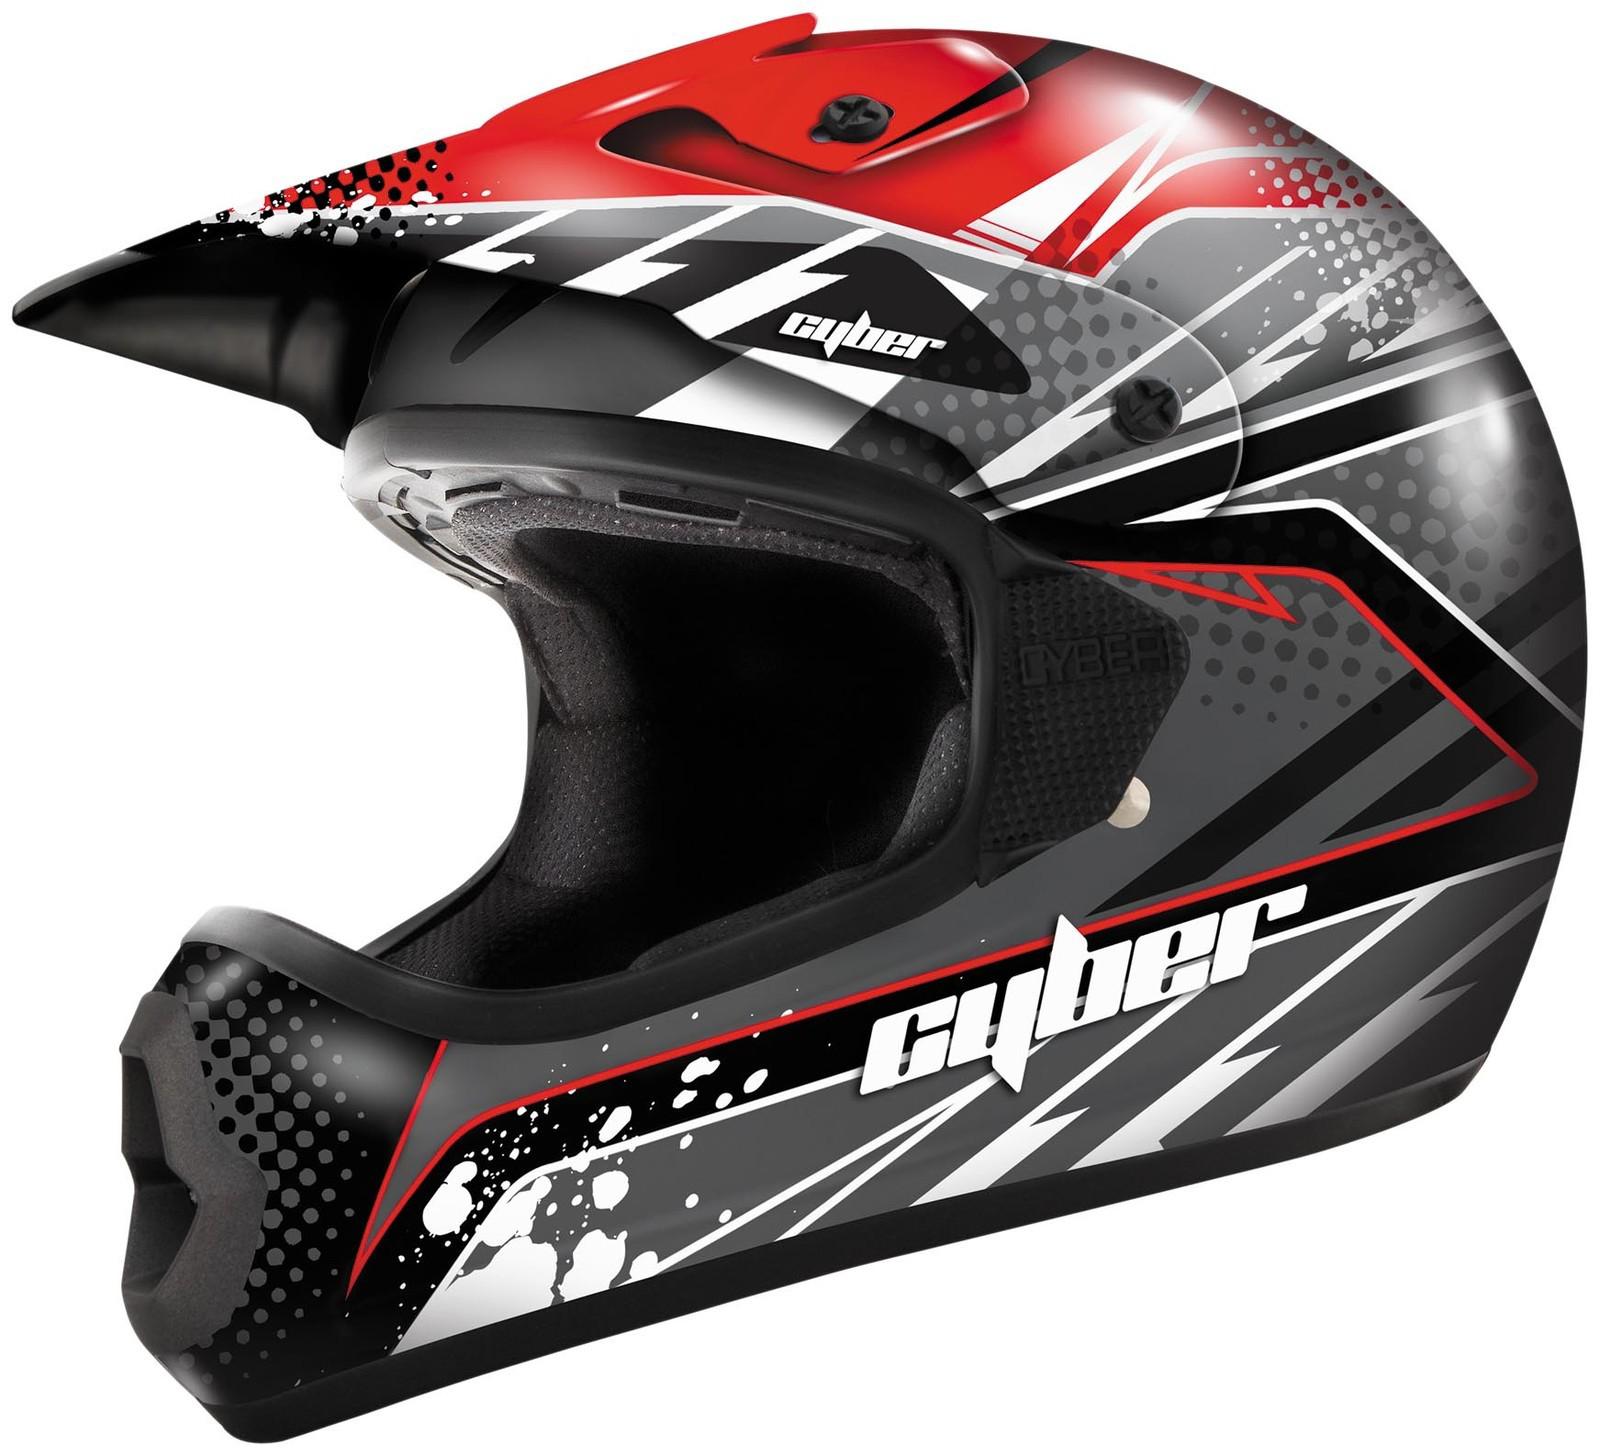 Cyber helmet ux-22 youth size small red and black motorcross new 640890